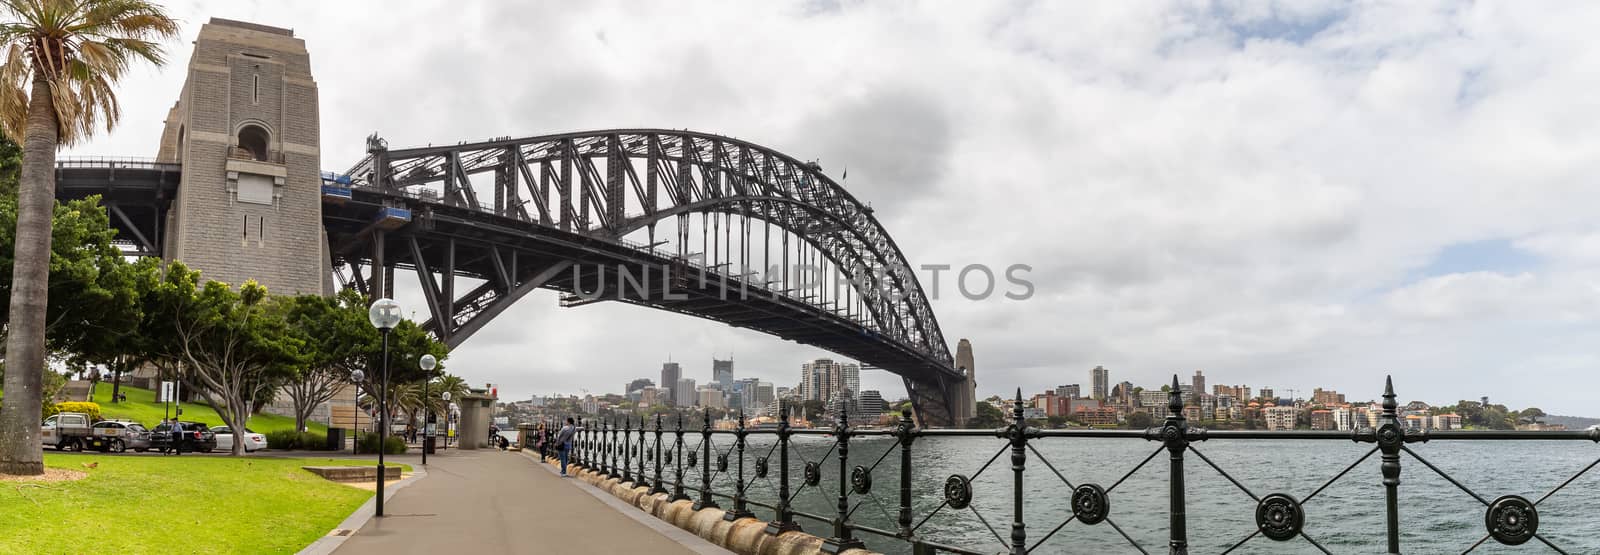 View of Sydney harbor bridge and downtown by DamantisZ